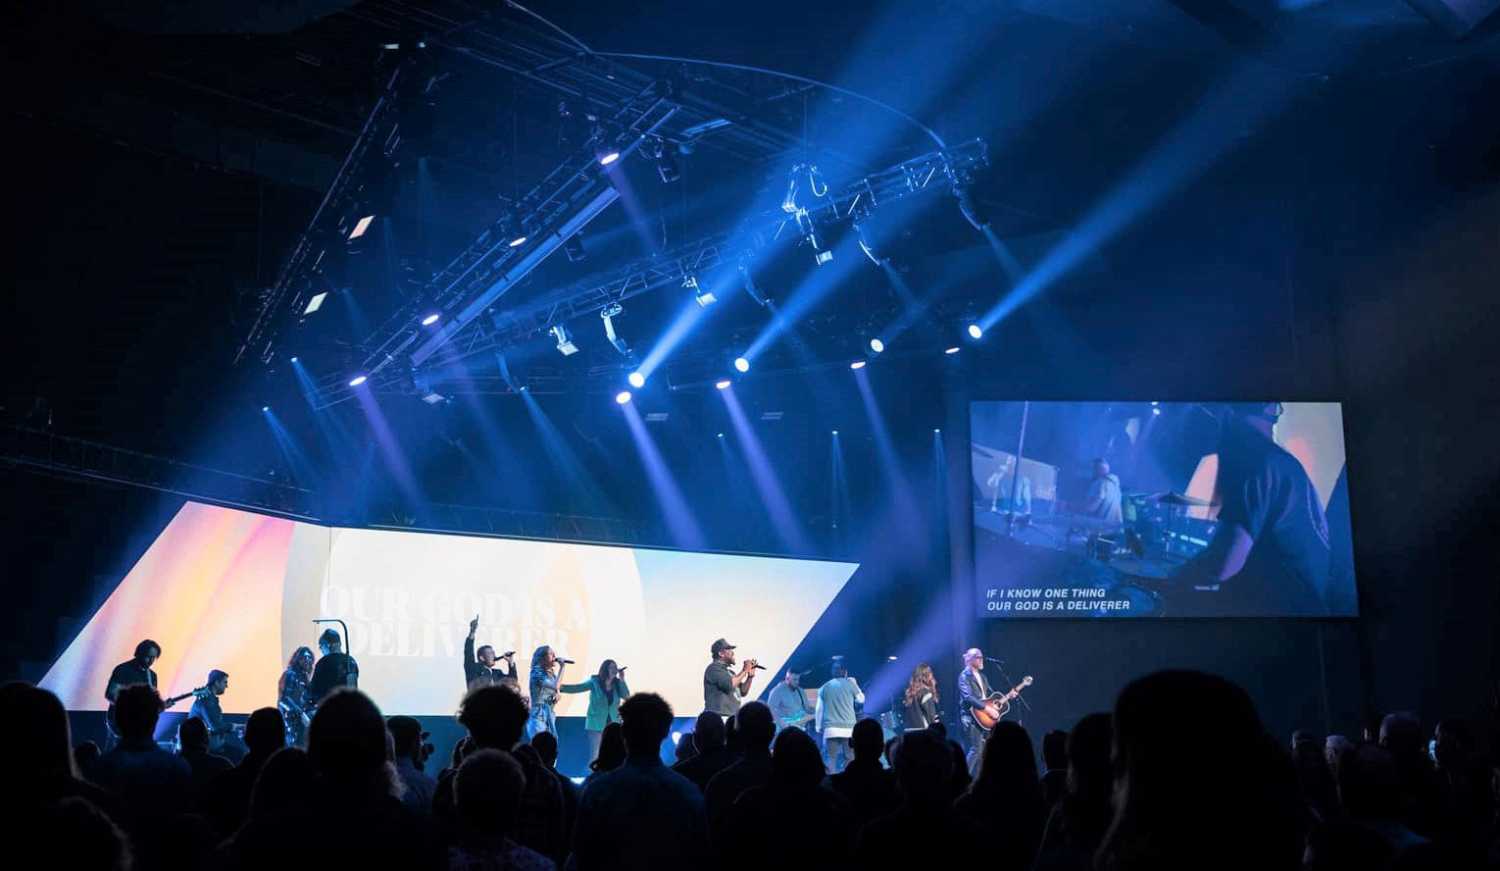 Connection Pointe Christian Church in Brownsburg